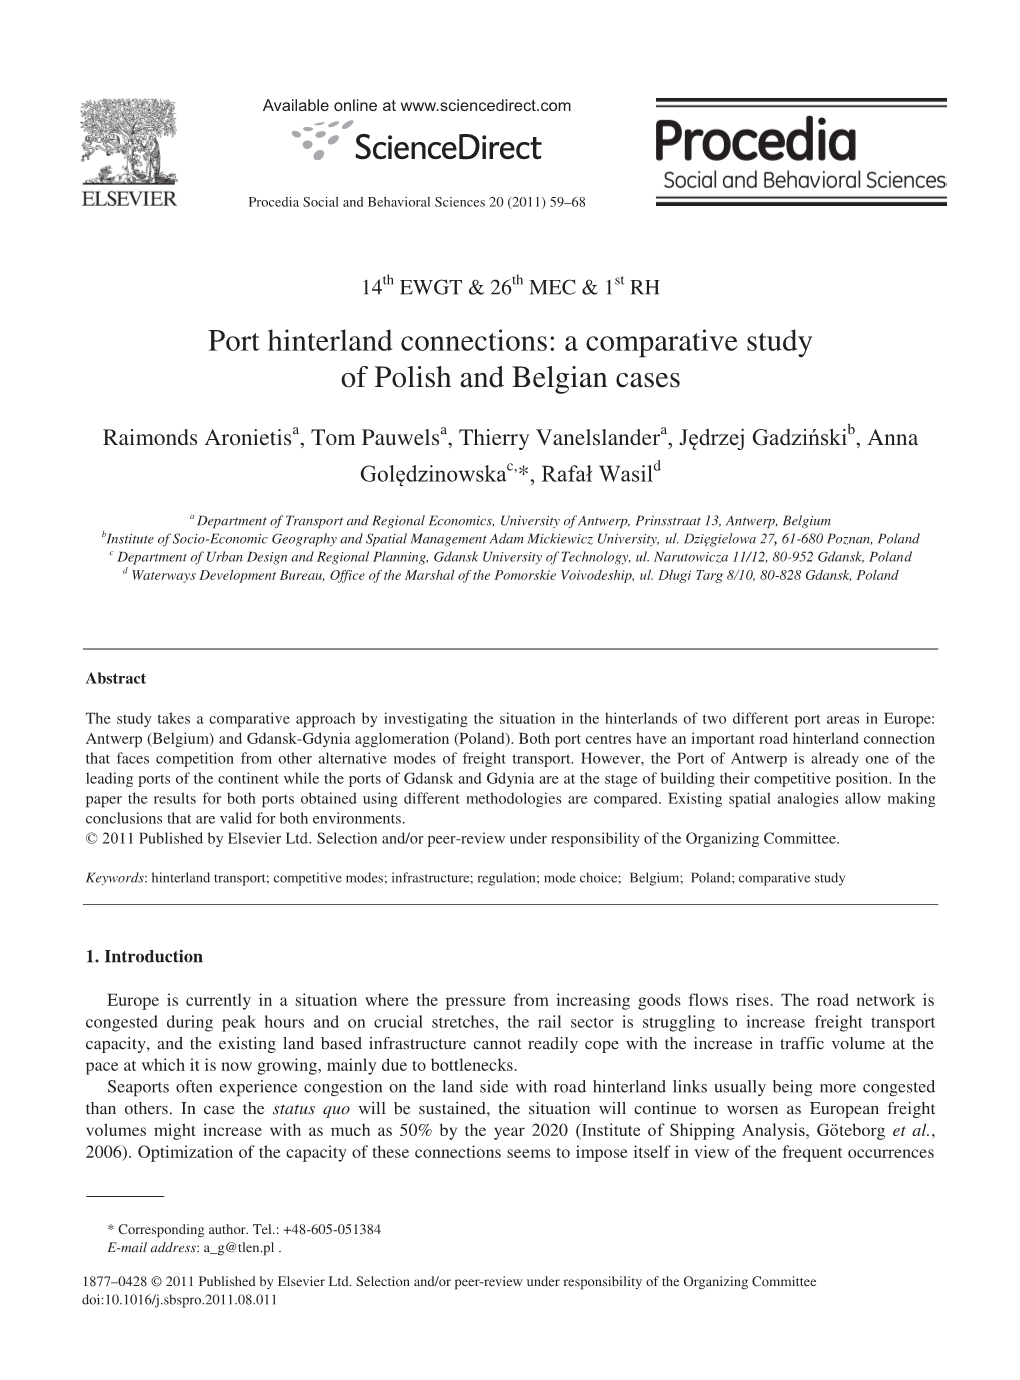 Port Hinterland Connections: a Comparative Study of Polish and Belgian Cases